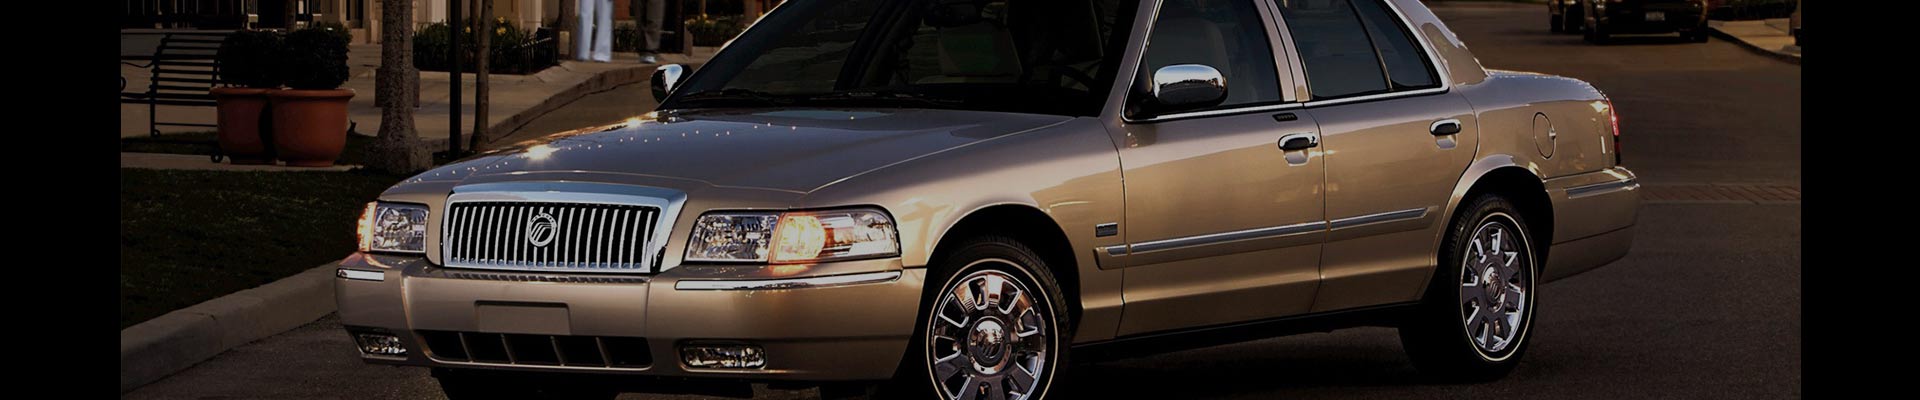 Shop Replacement and OEM 1998 Mercury Grand Marquis Parts with Discounted Price on the Net